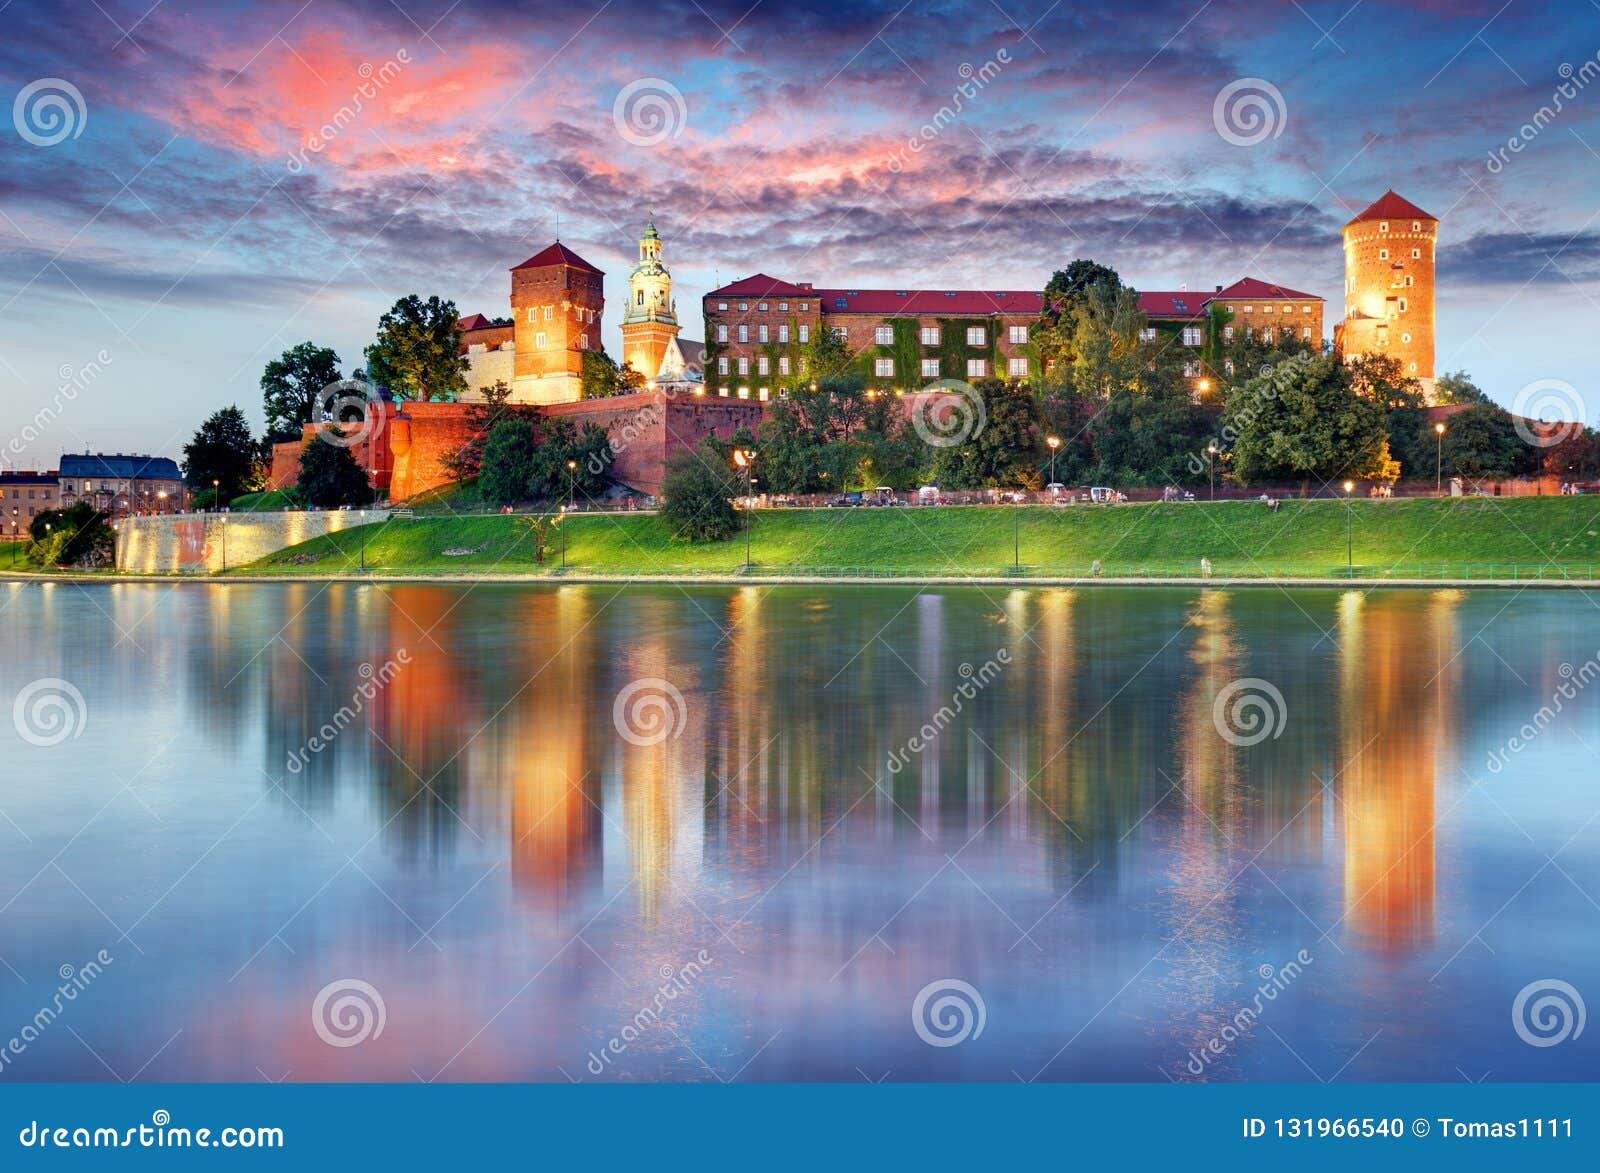 wawel hill with castle in krakow at night, poland